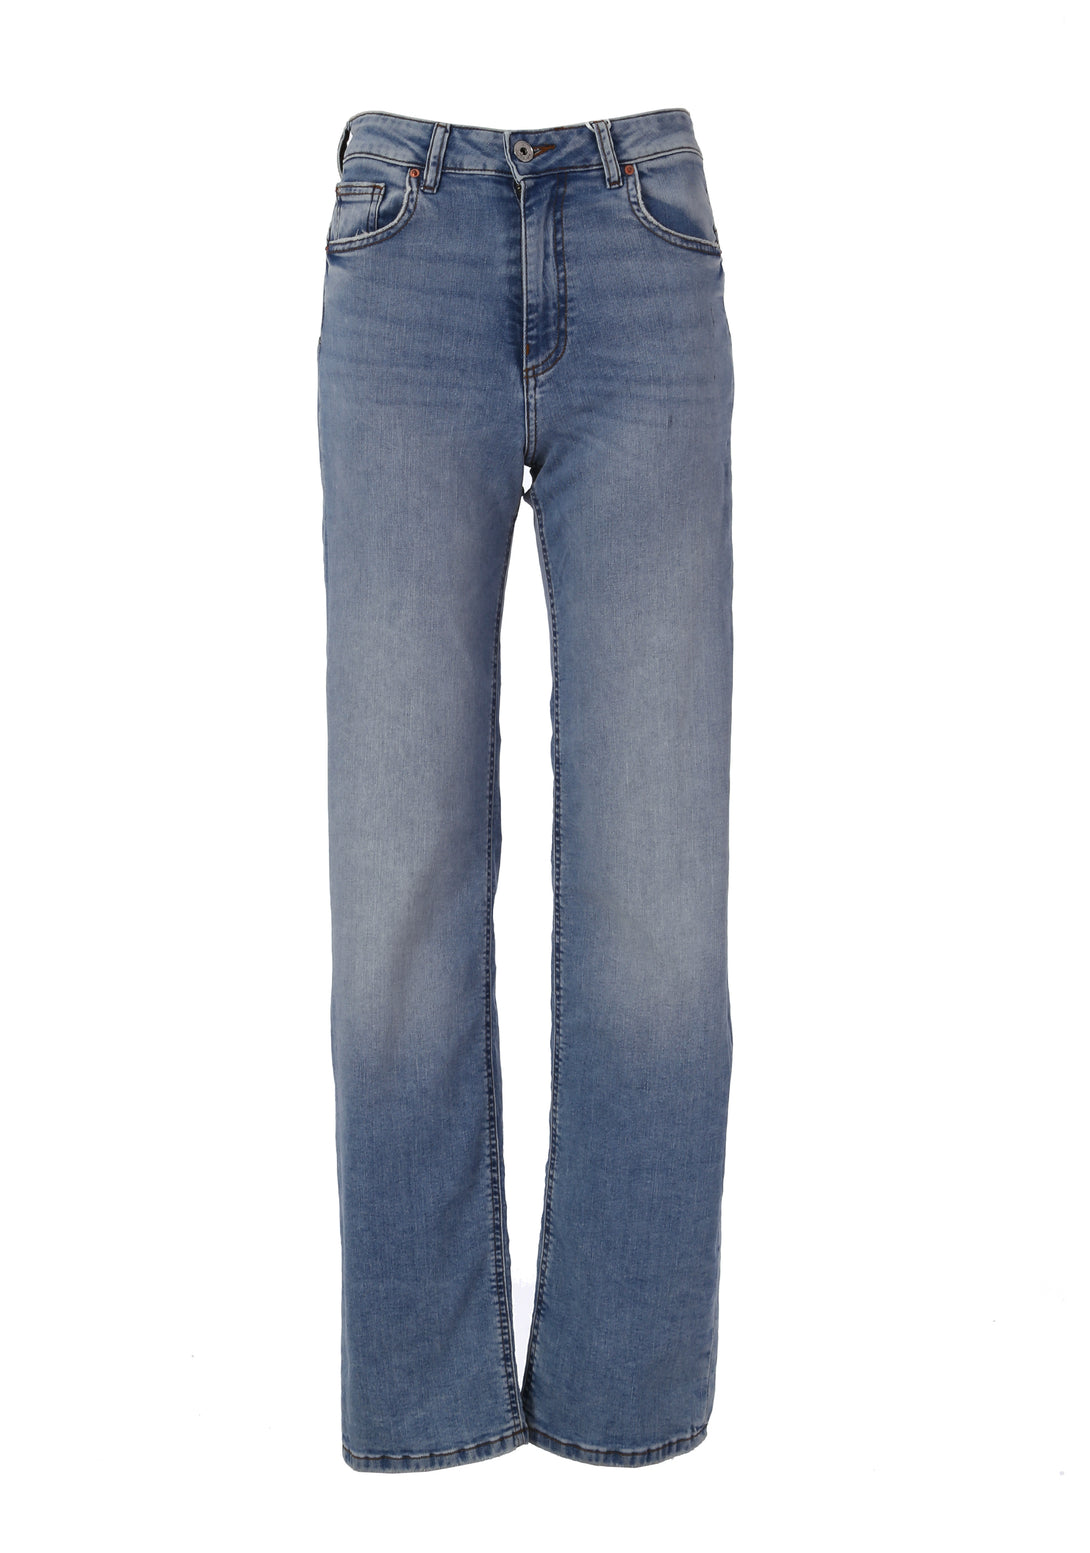 Jeans straight line made in denim with middle stone wash Fracomina FP24SV8050D40103-062-1